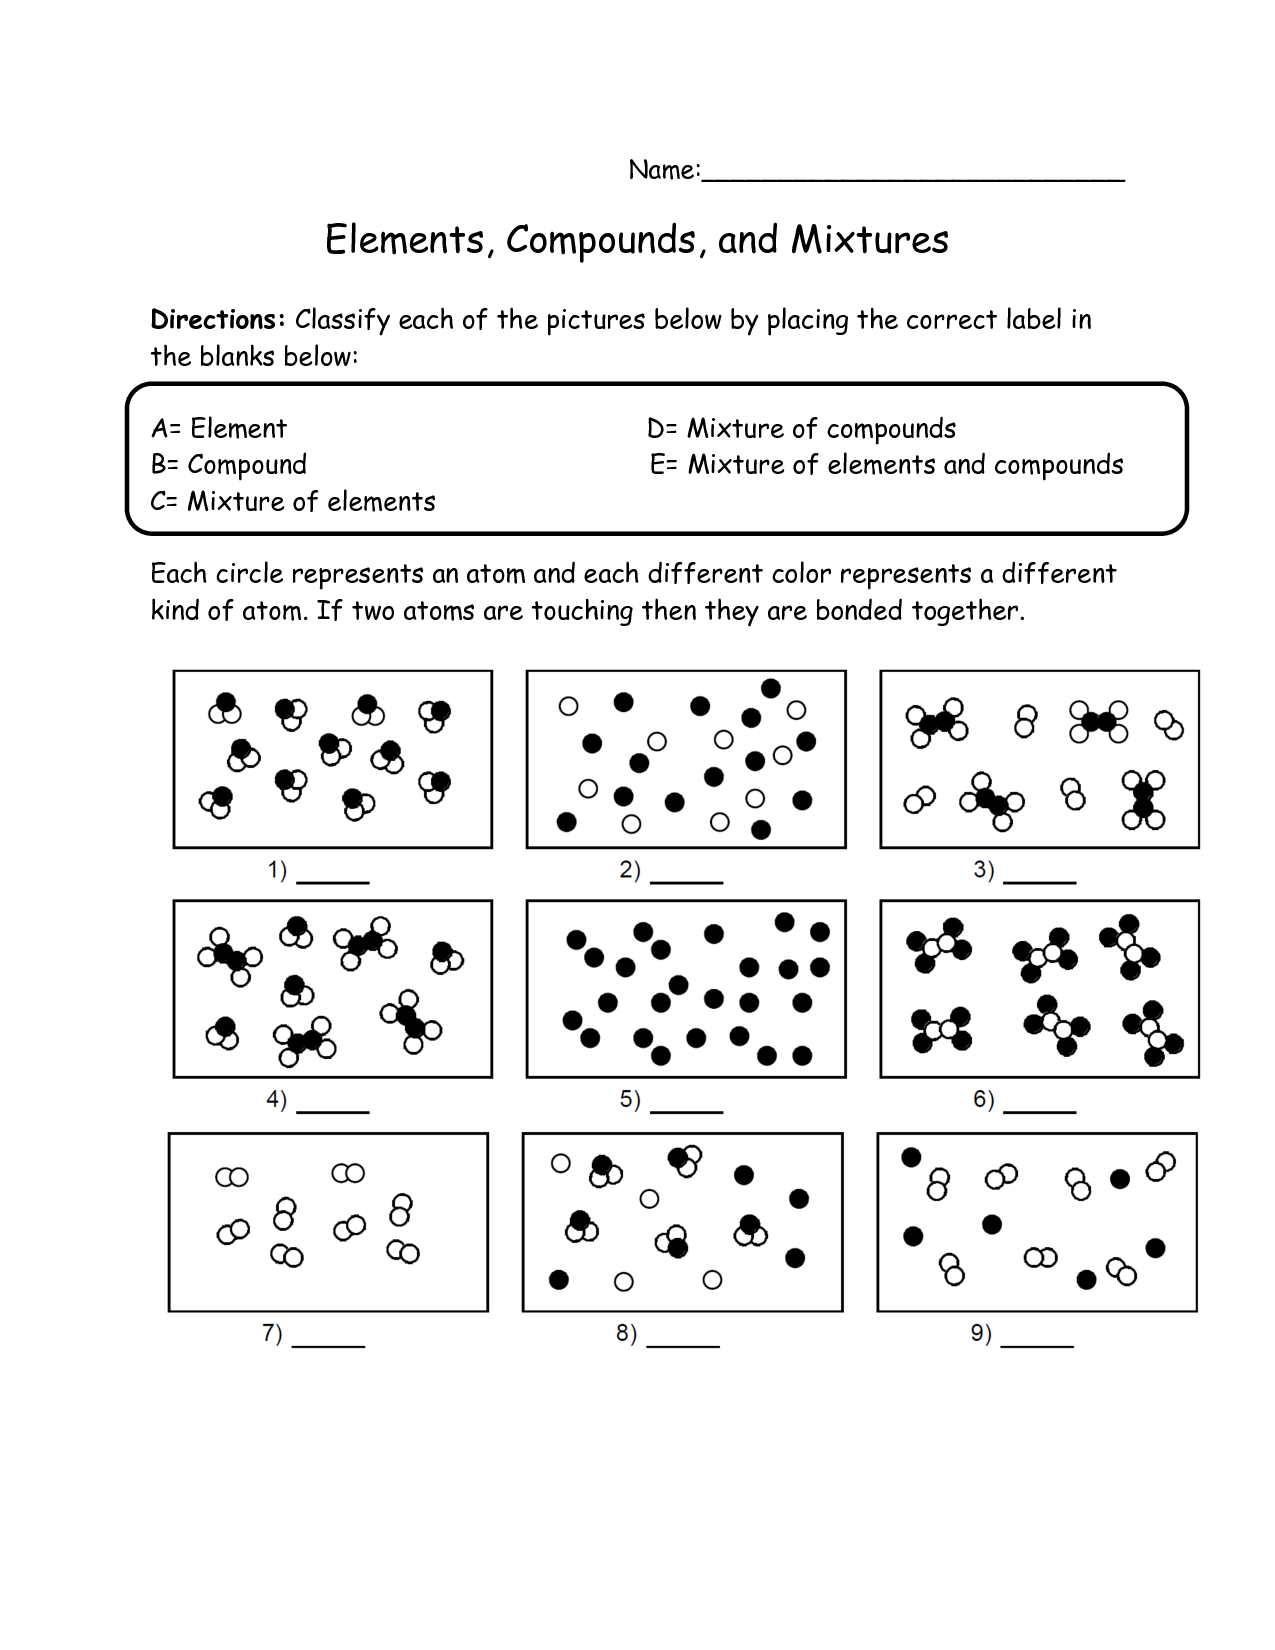 Elements Compounds and Mixtures Worksheet/ Crossword Puzzle by Intended For Element Compound Mixture Worksheet